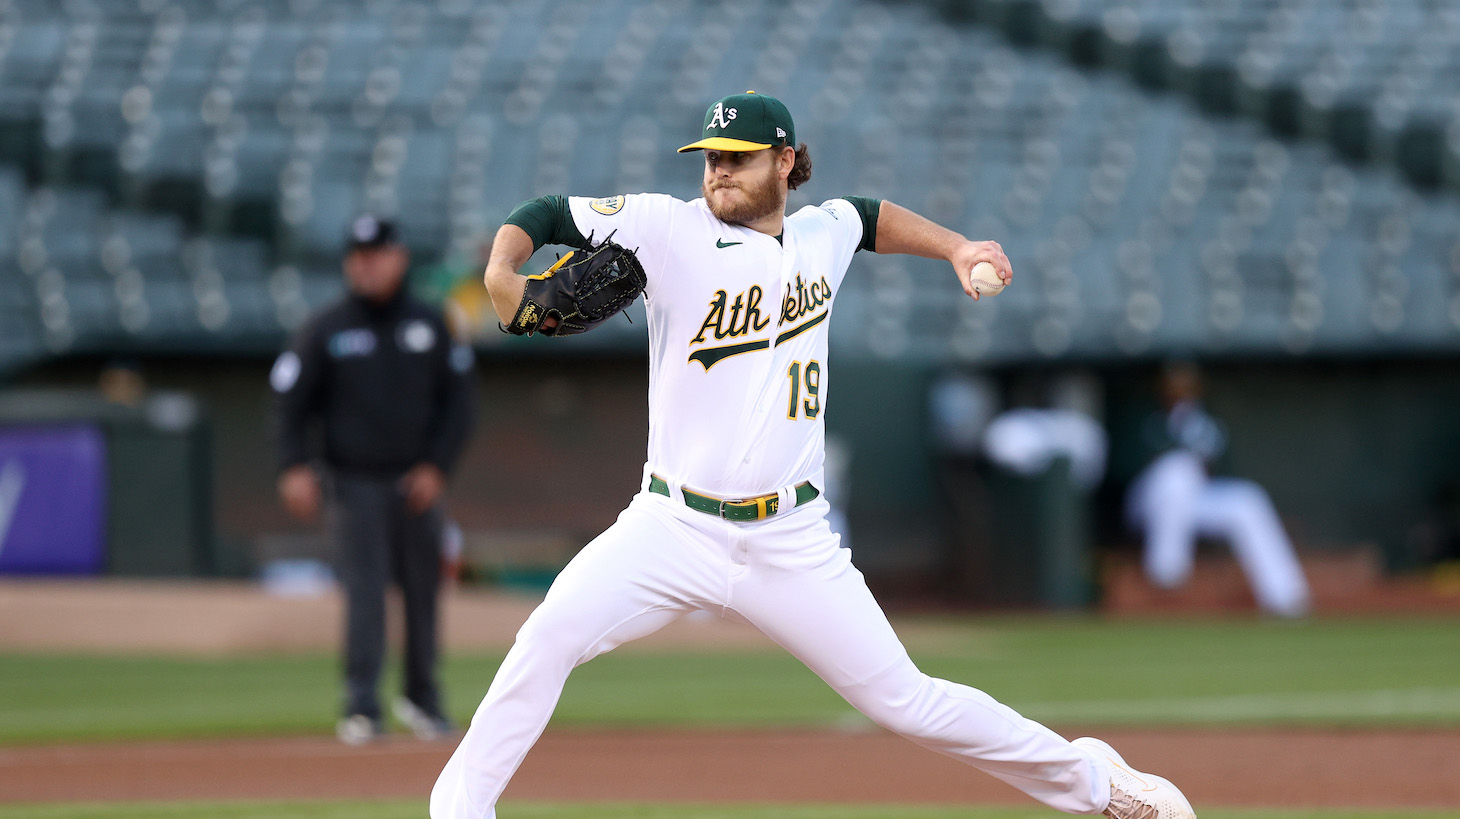 OAKLAND, CALIFORNIA - APRIL 19: Cole Irvin #19 of the Oakland Athletics pitches against the Baltimore Orioles in the first inning at RingCentral Coliseum on April 19, 2022 in Oakland, California. (Photo by Ezra Shaw/Getty Images)